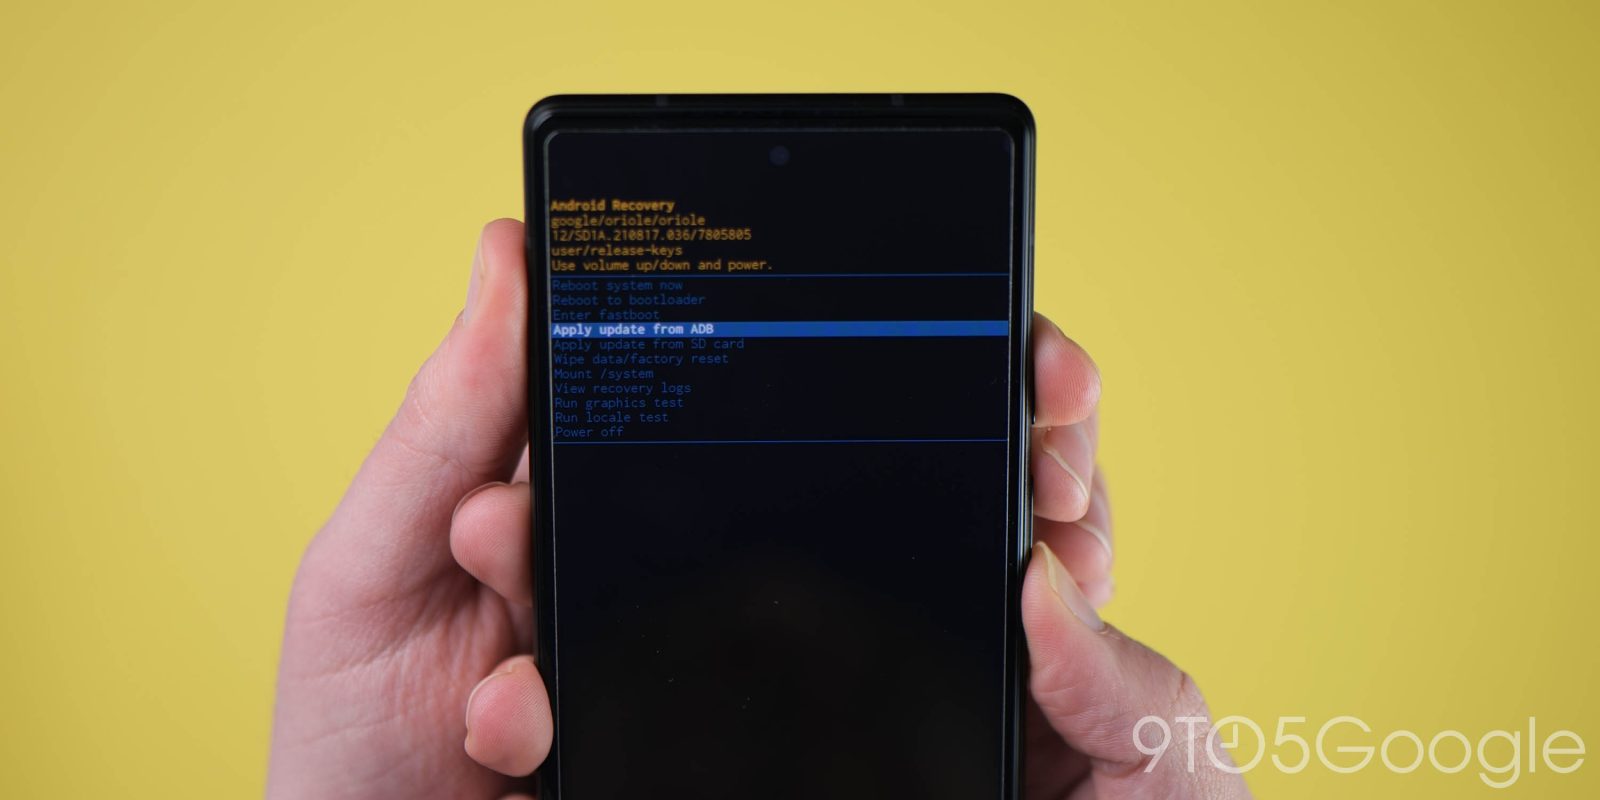 Guide for the Google Pixel 4 - Install apps from Google Play